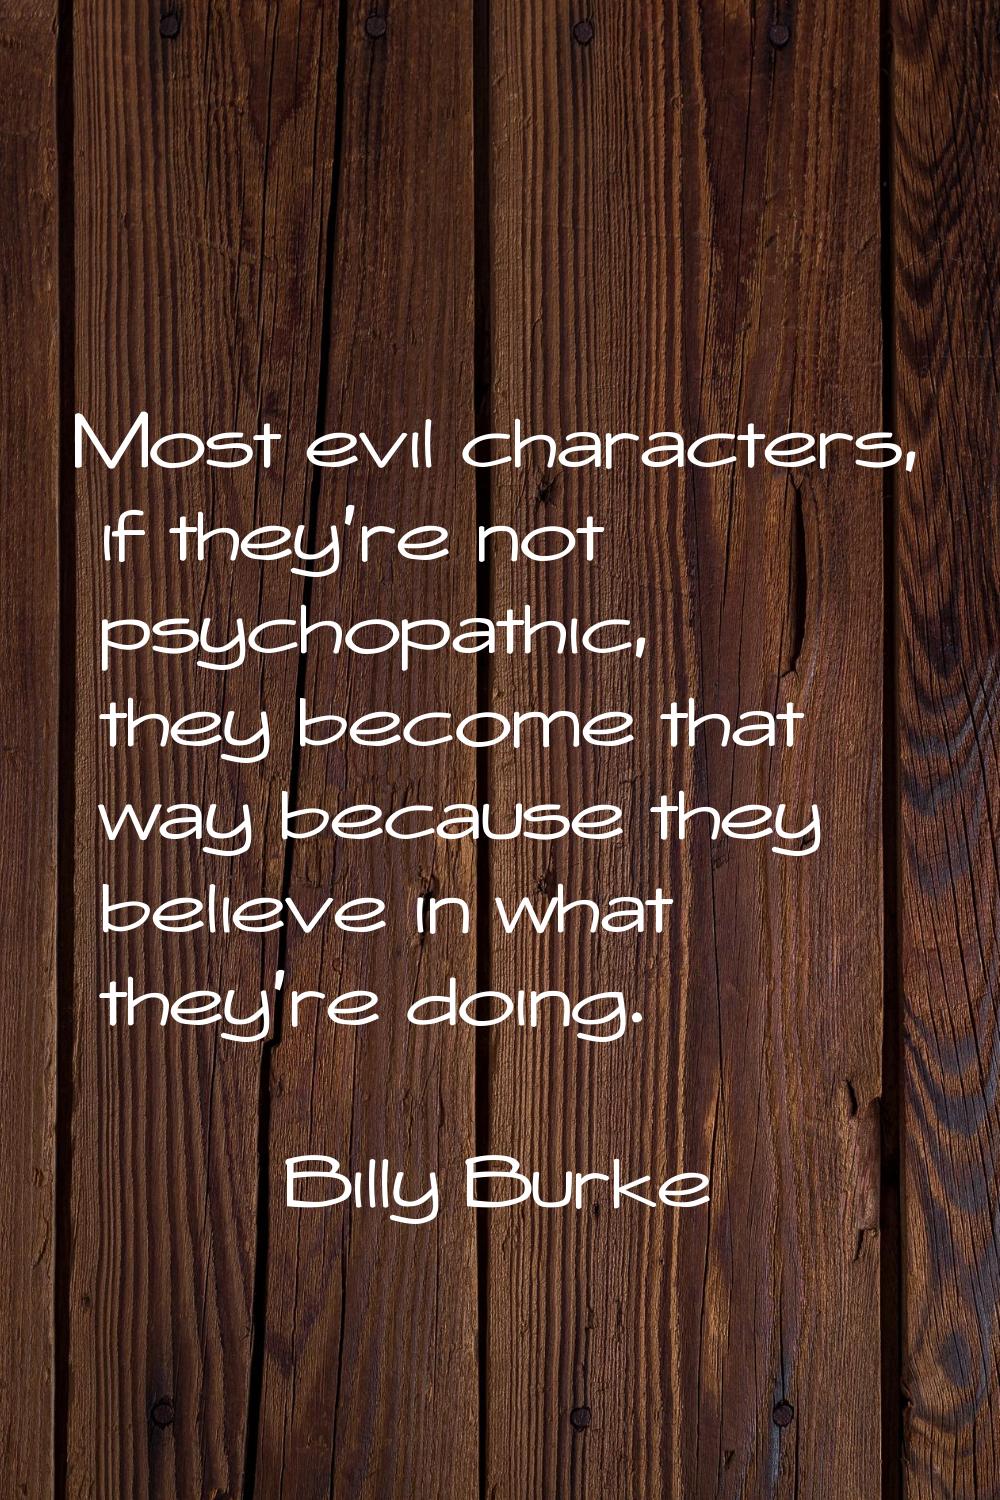 Most evil characters, if they're not psychopathic, they become that way because they believe in wha